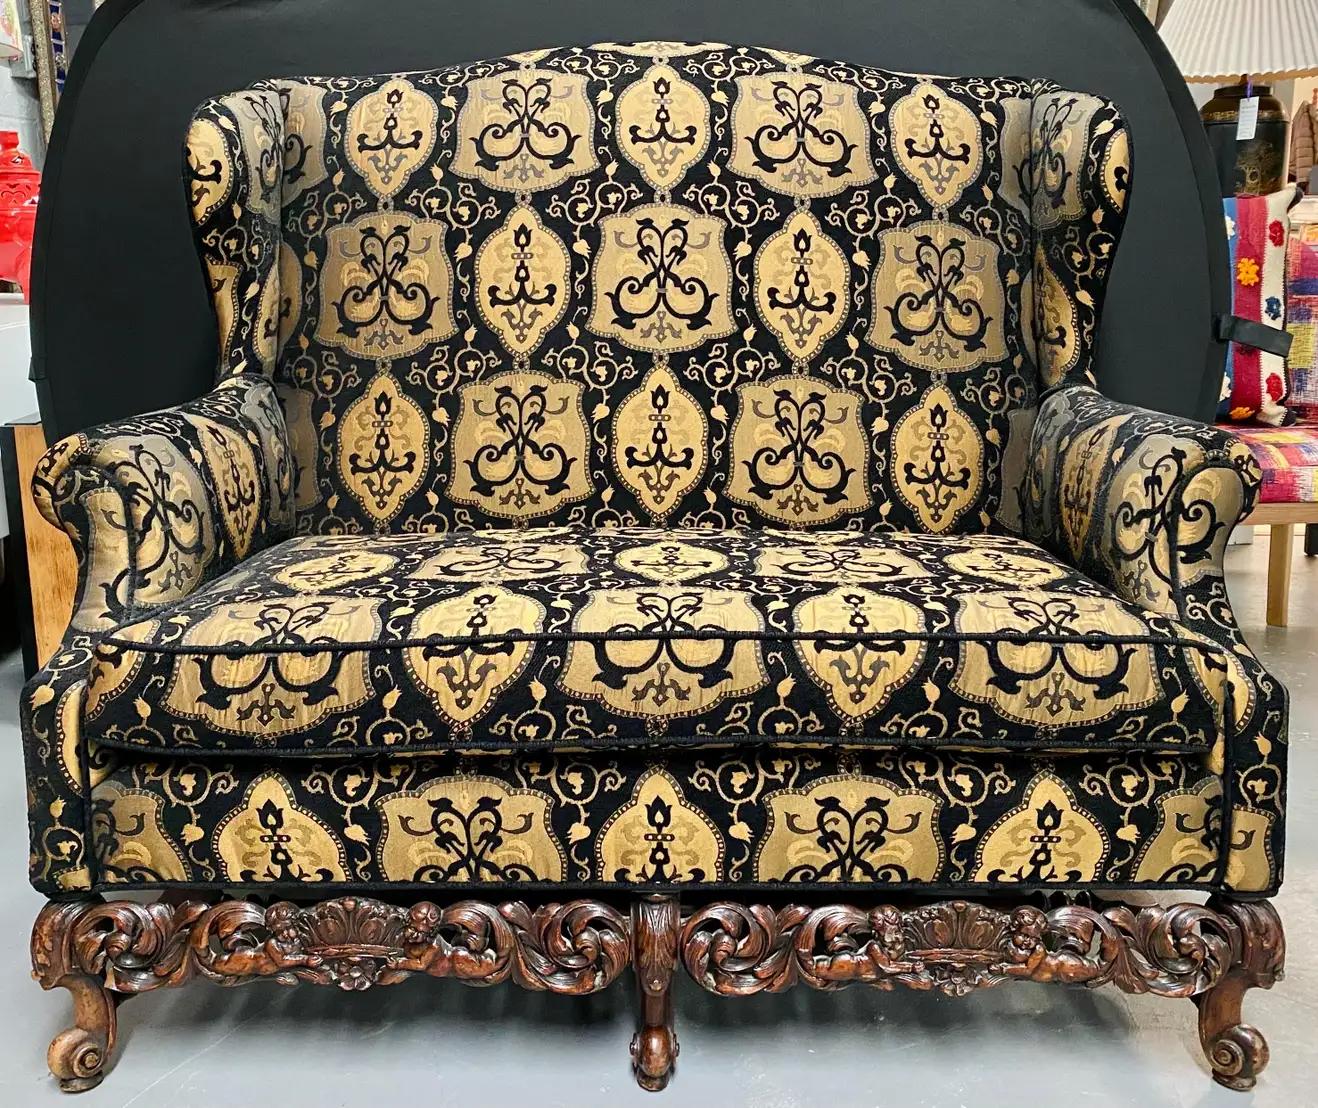 European Italian Rococo Revival Style Settee or Sofa, Black and Beige Upholstery, a Pair For Sale